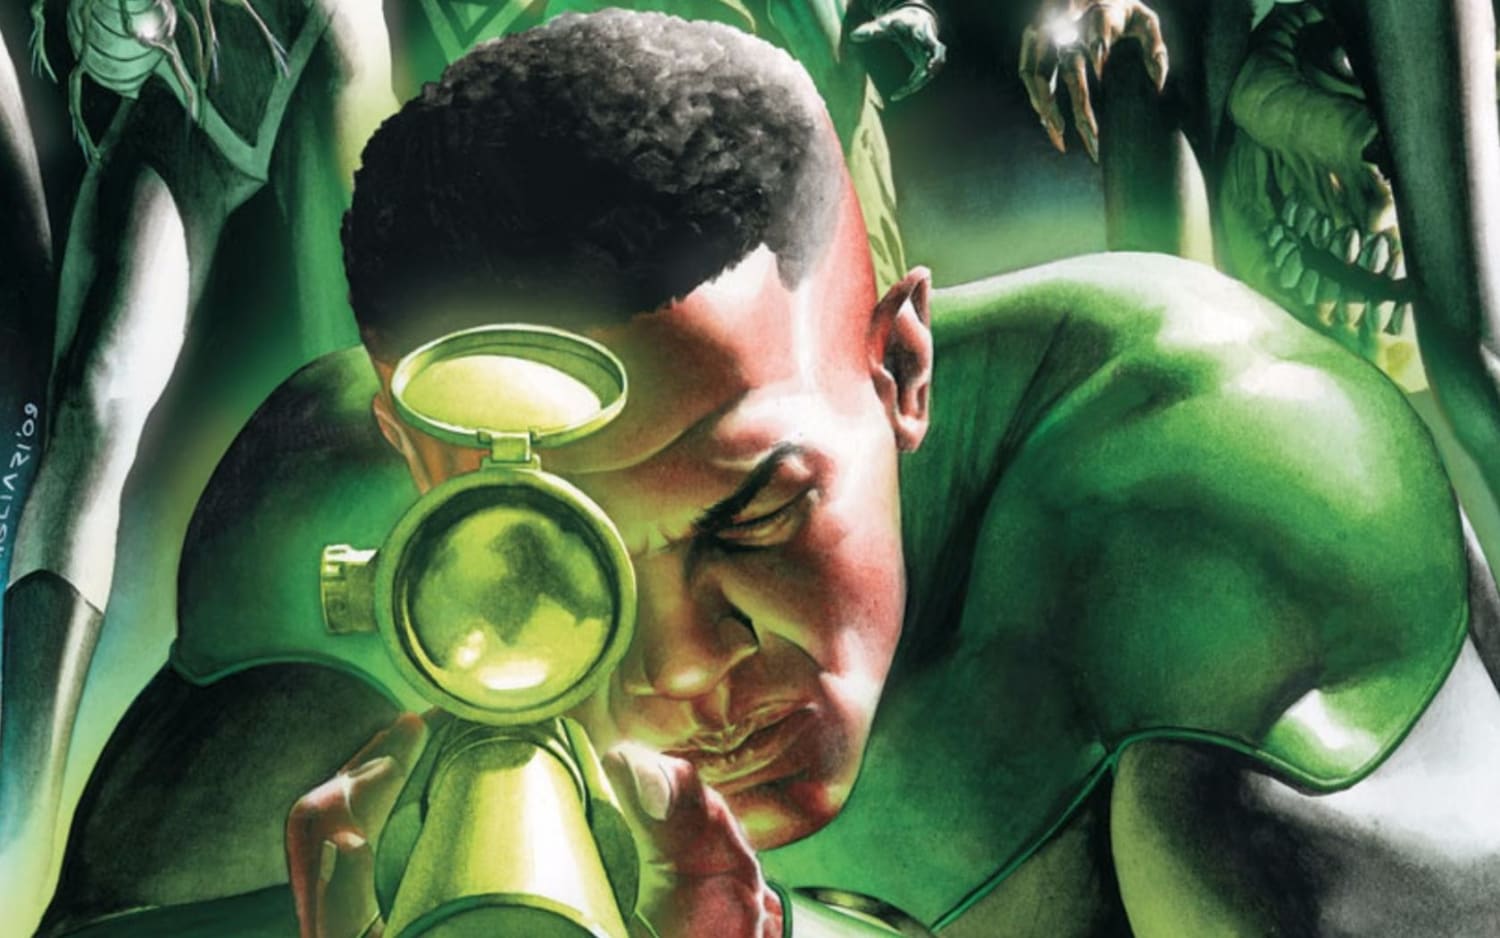 [Artwork] Green Lantern, by unknown. Does anyone know the issue?